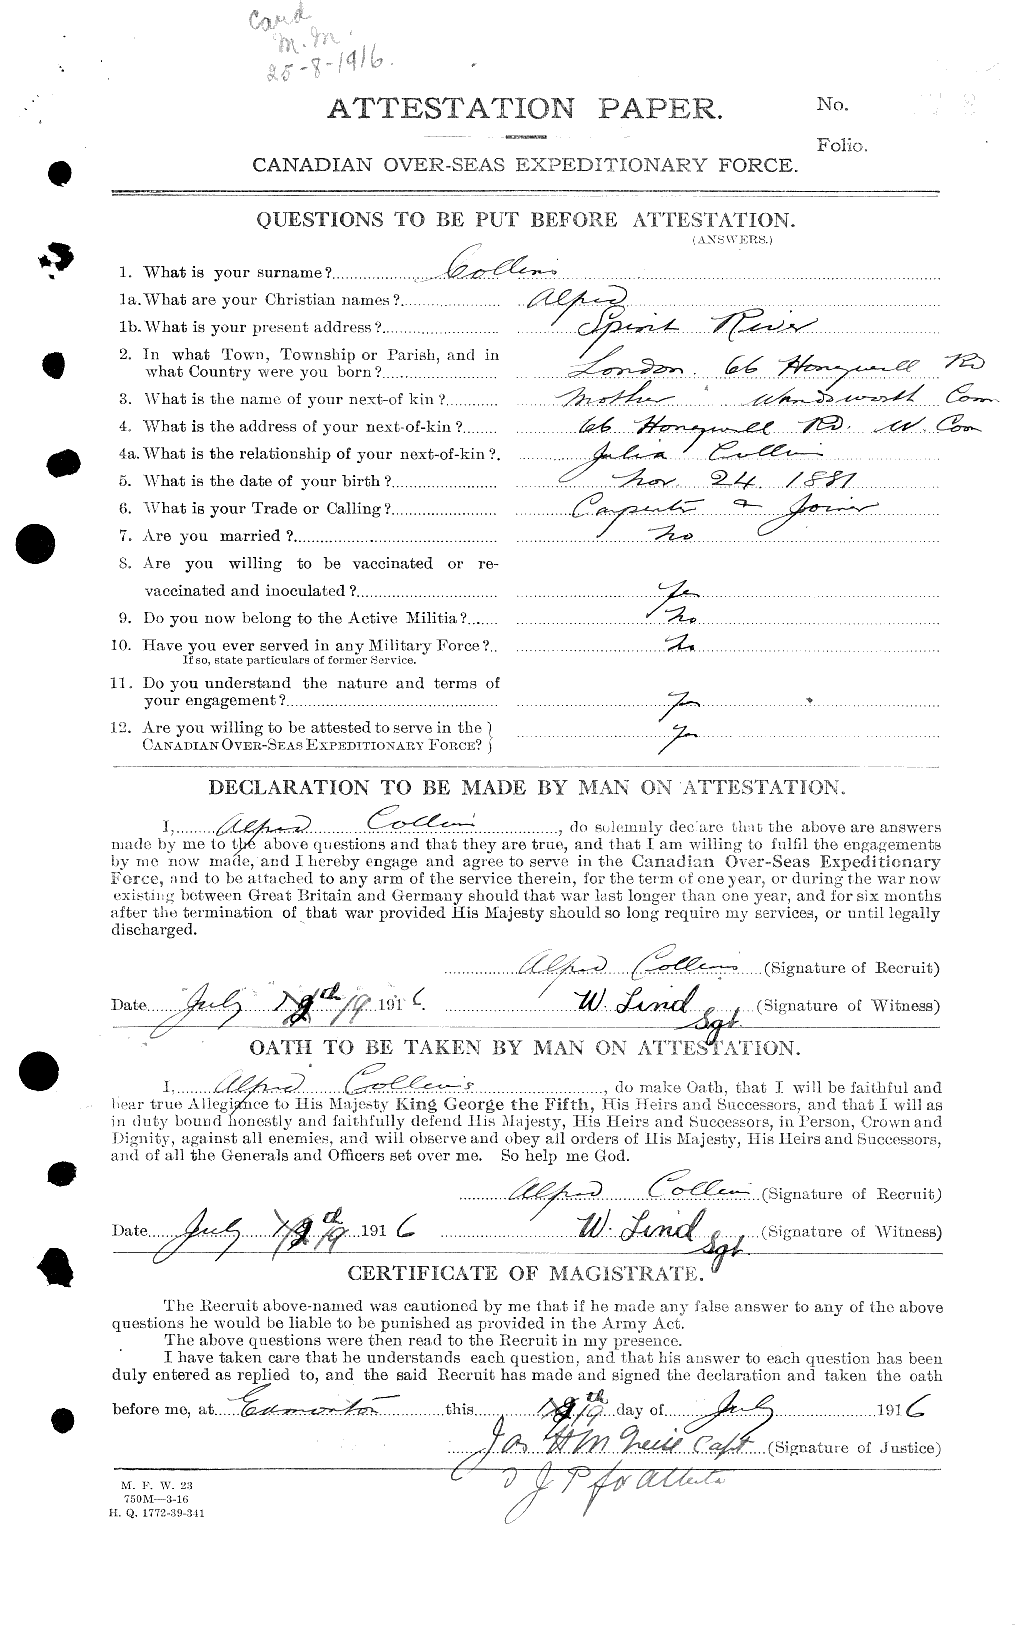 Personnel Records of the First World War - CEF 028949a